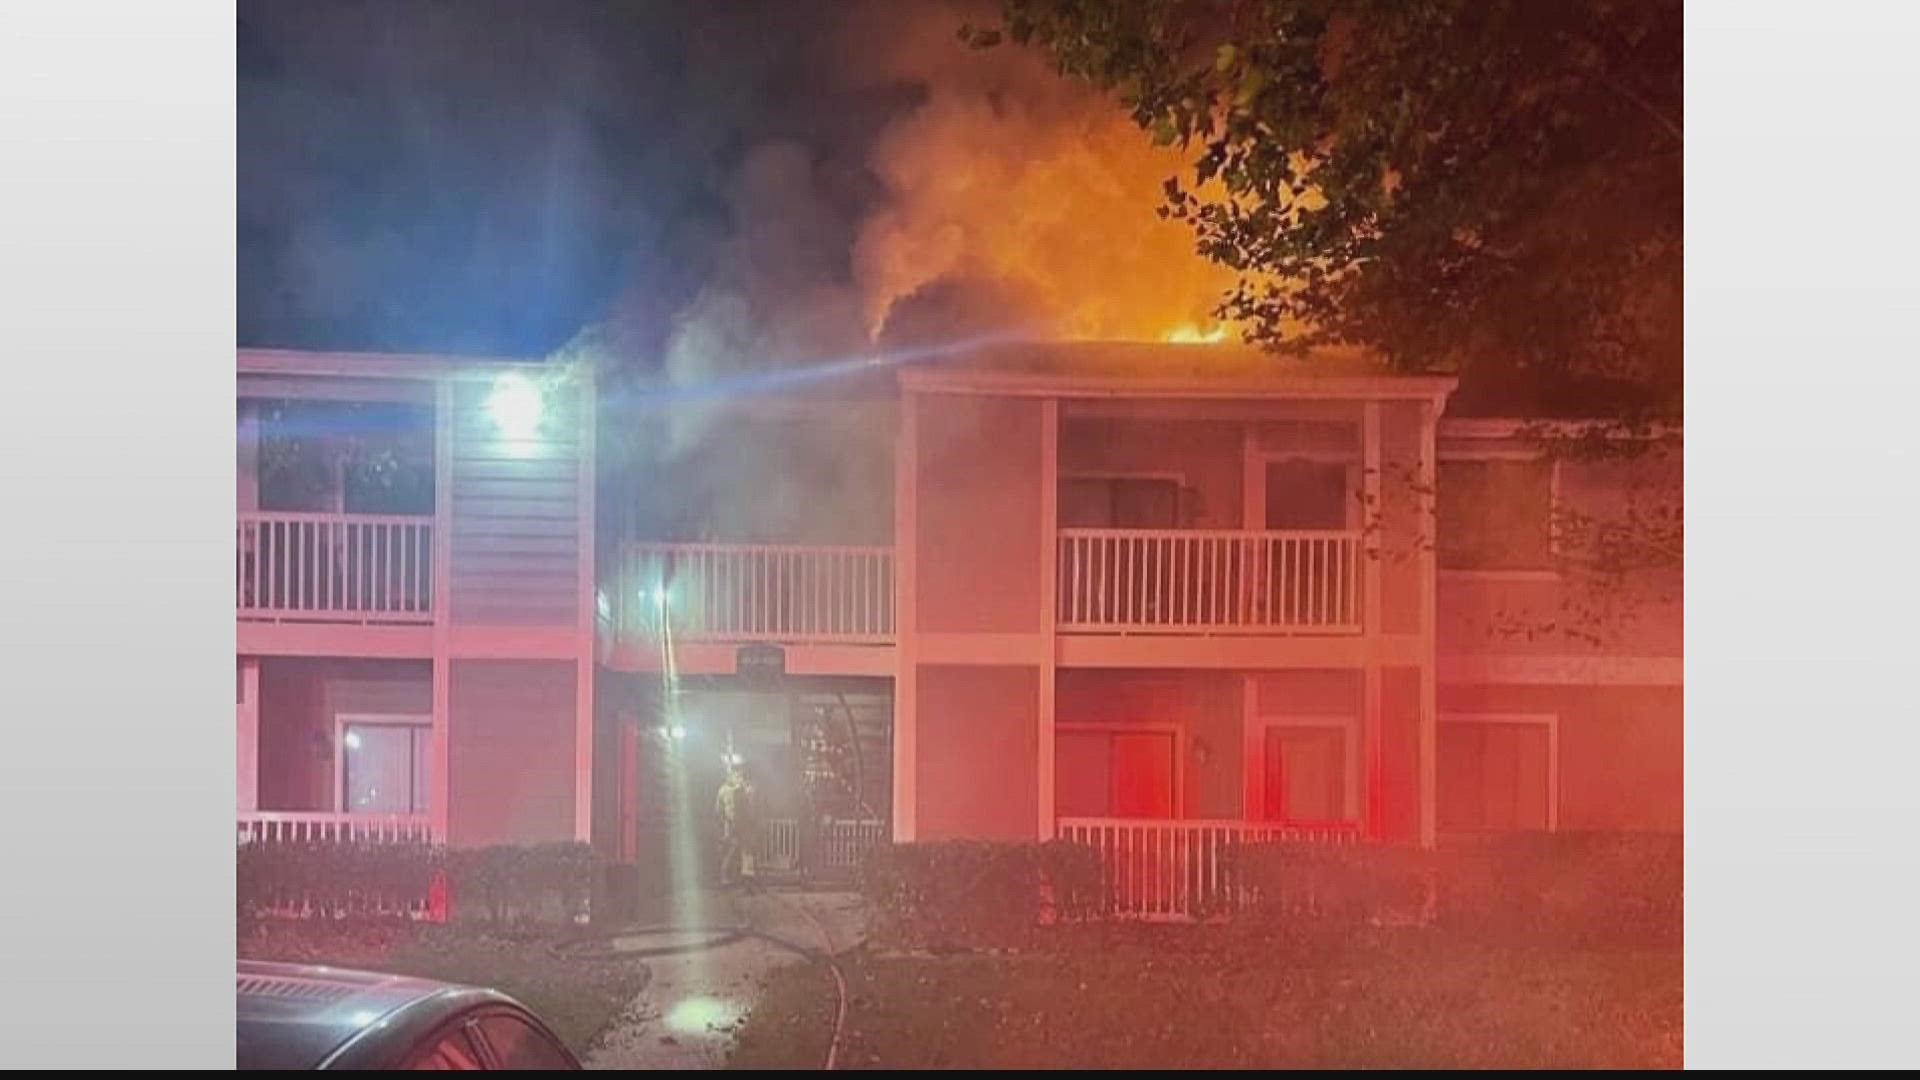 The Roswell Fire Department said it happened at the 10-unit Rosemont Apartments on Rosemont Parkway.